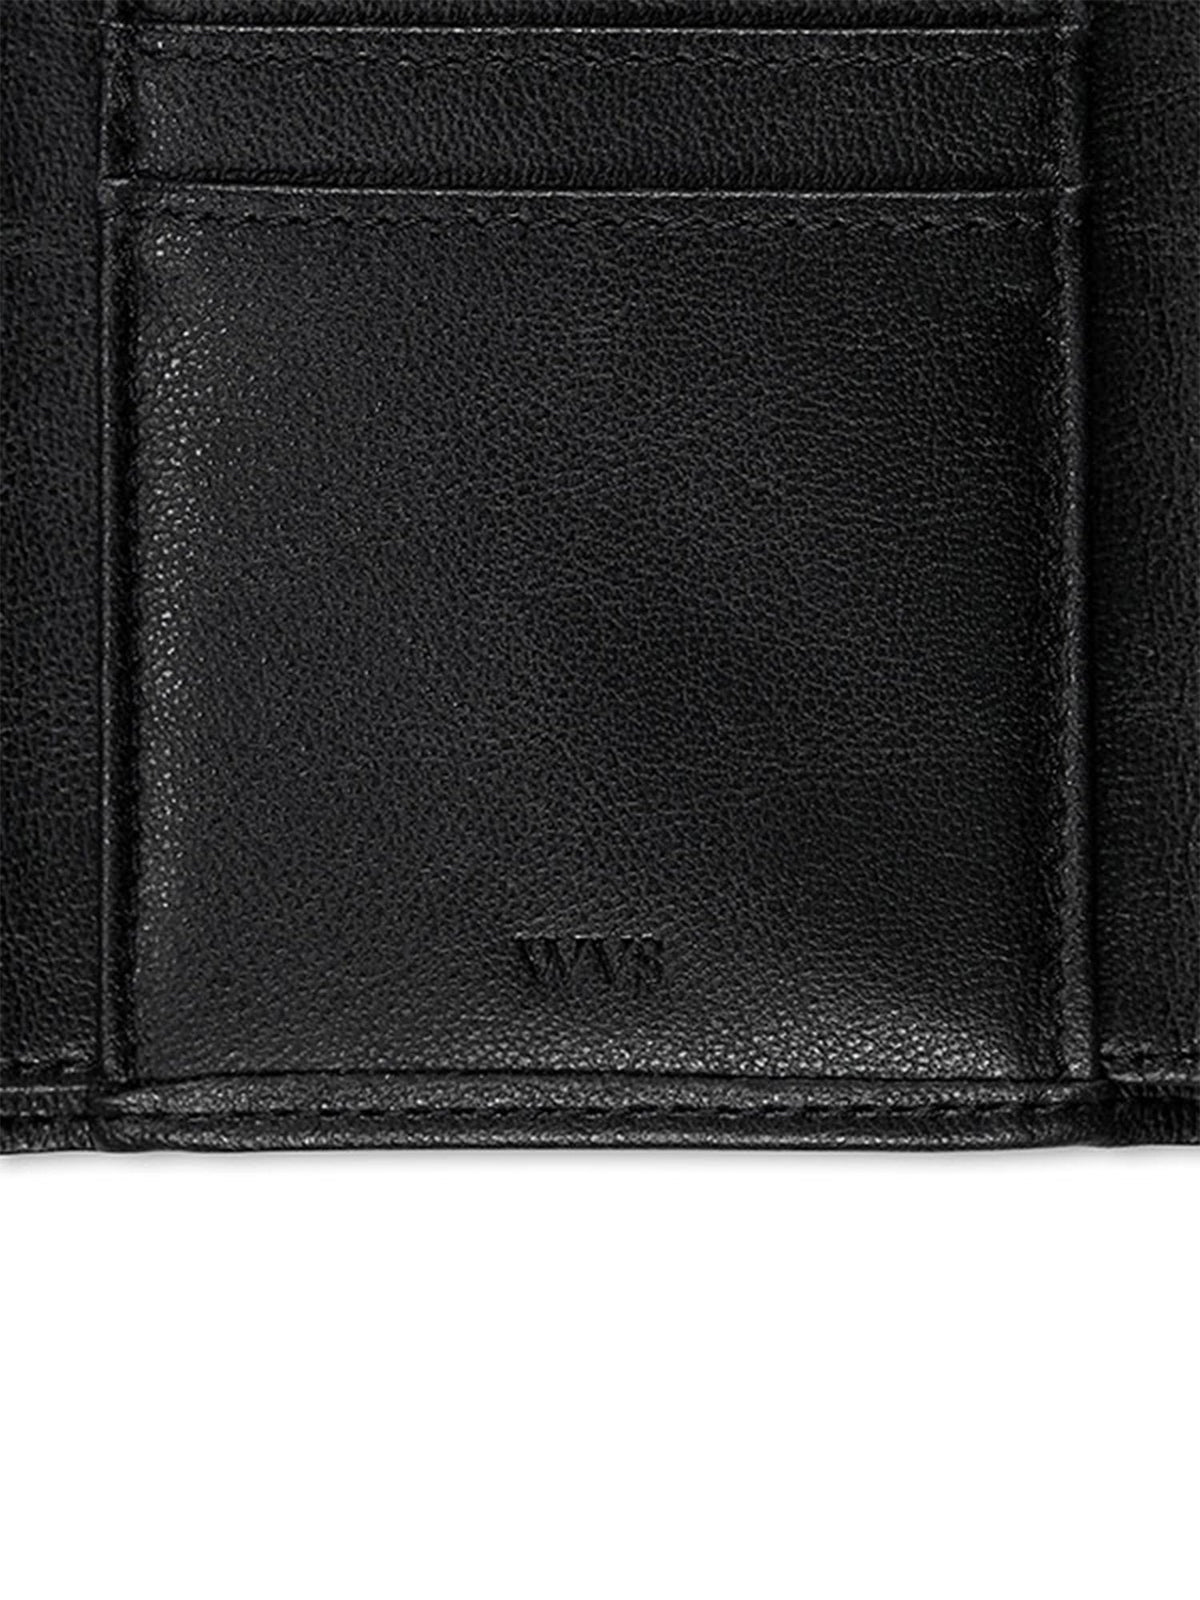 Trifold ID Wallet